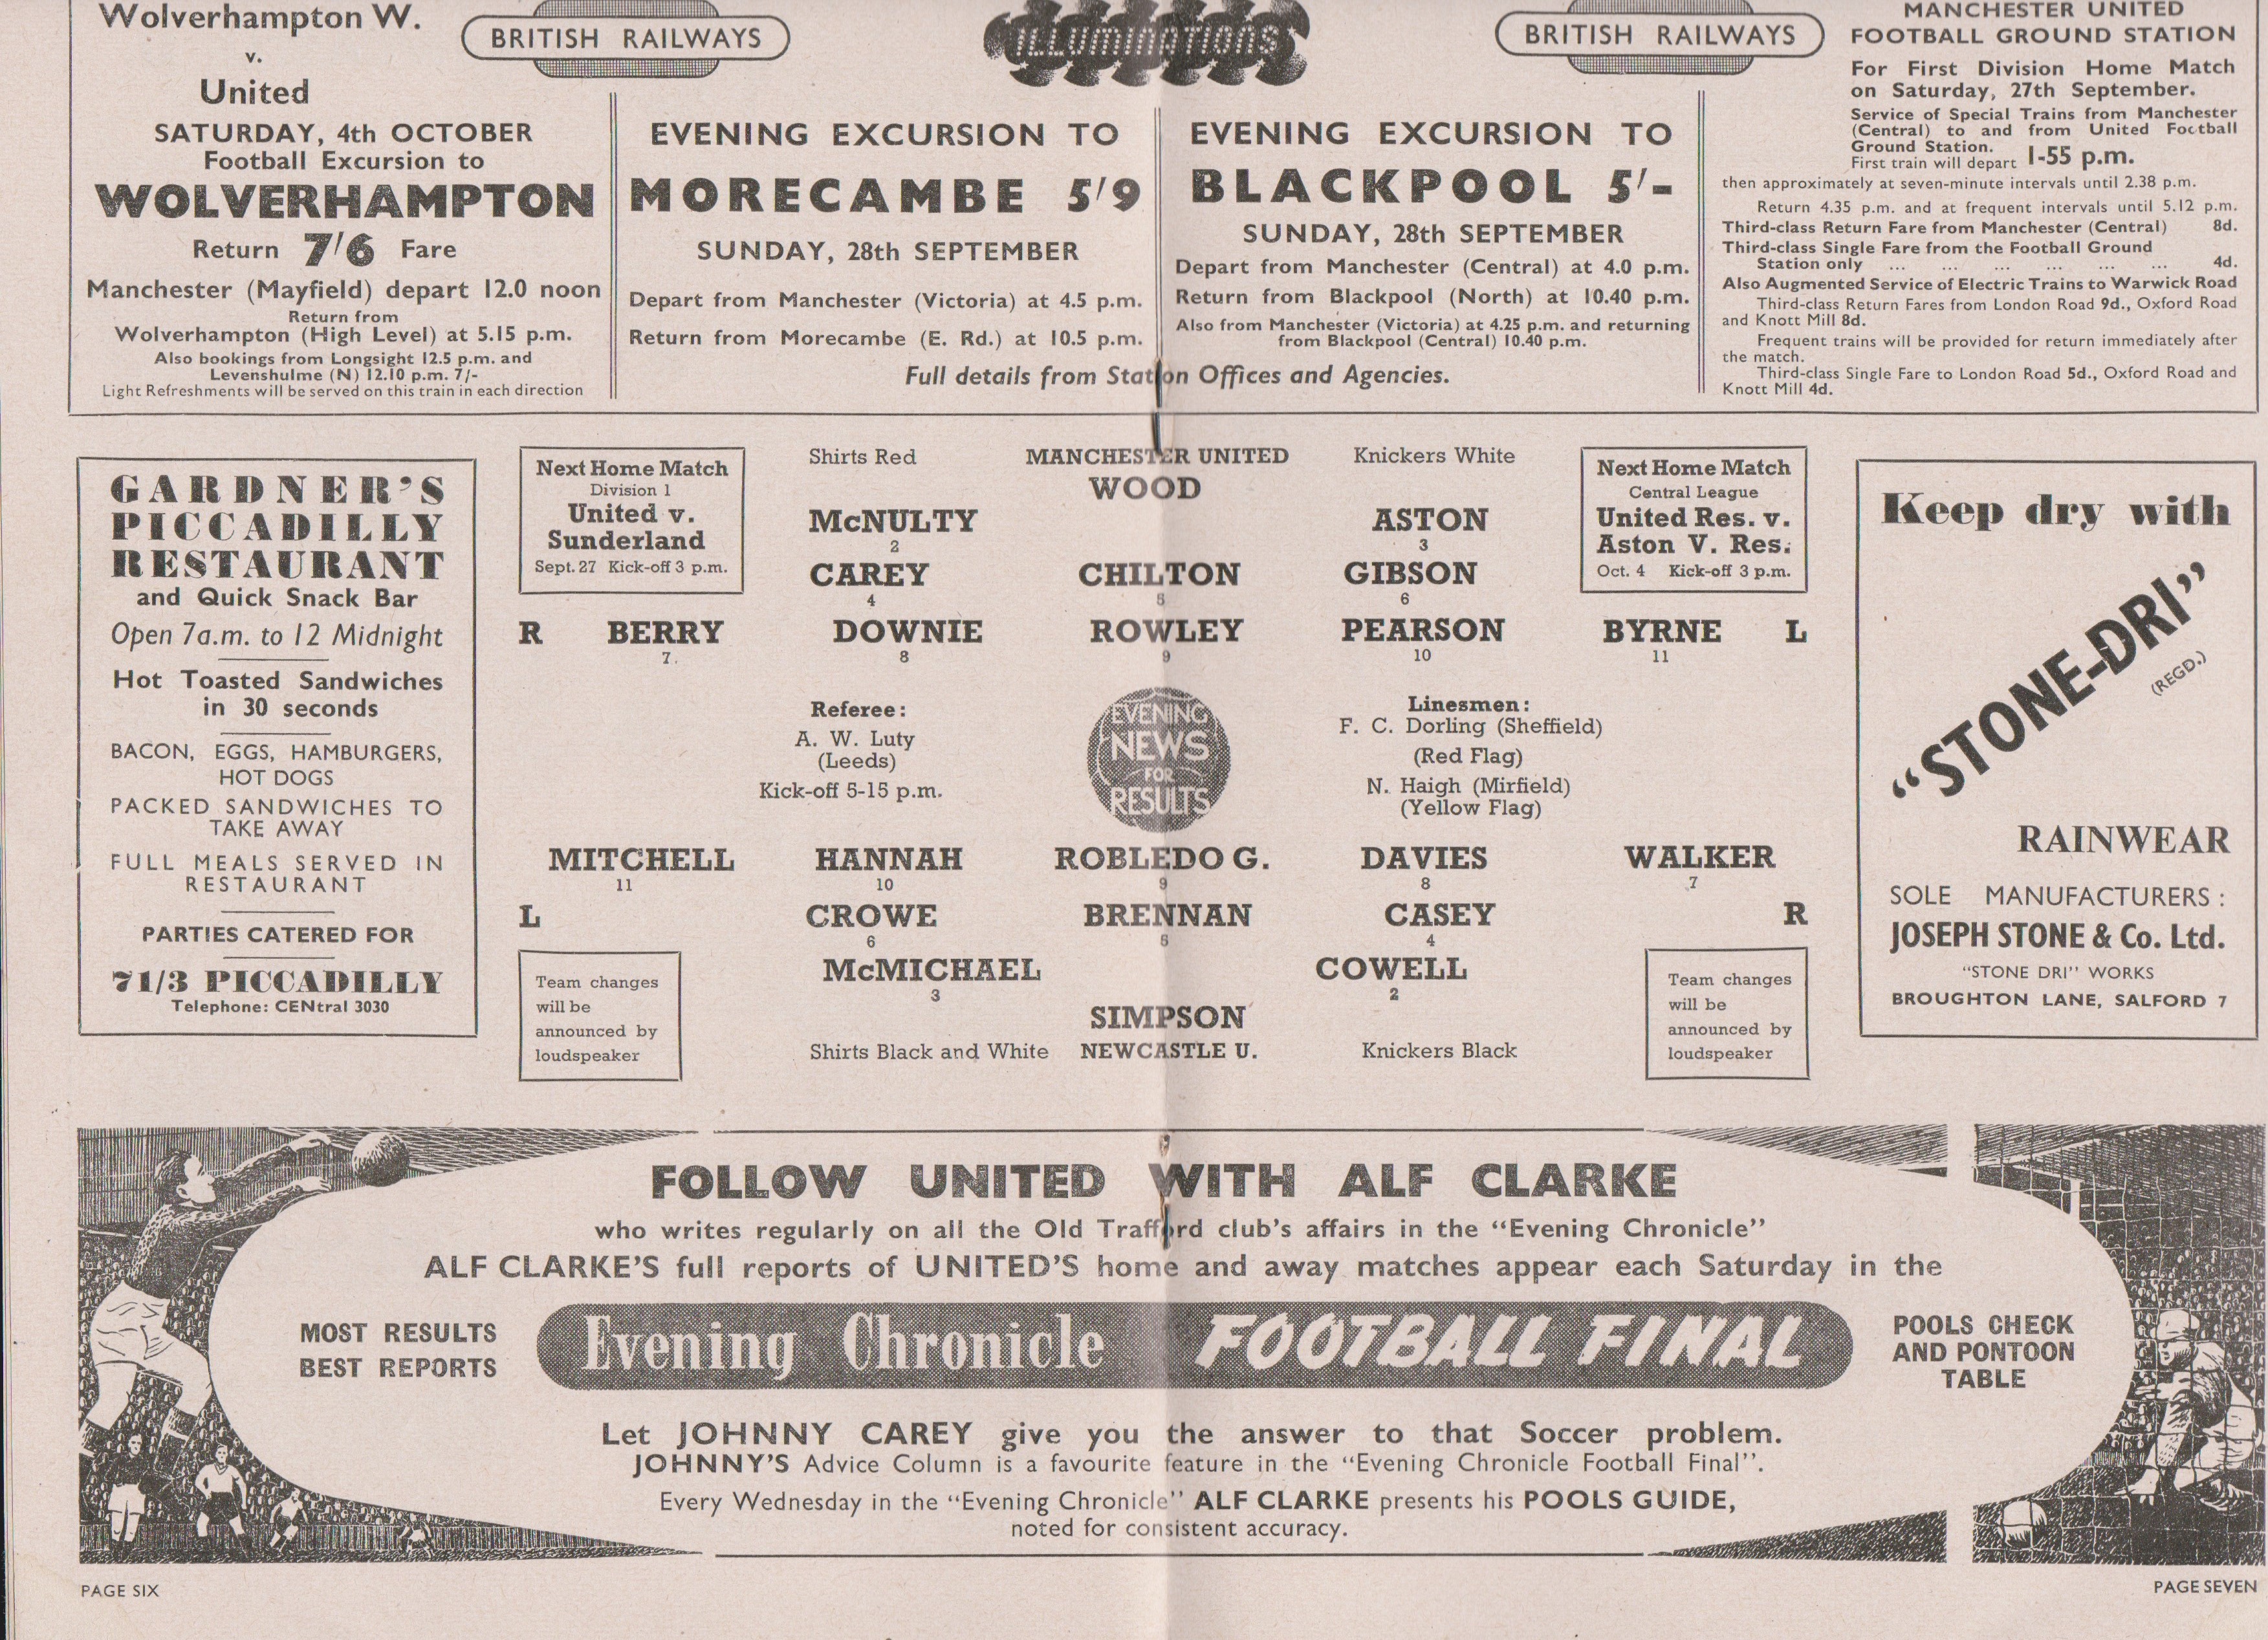 Programme Manchester United v Newcastle United Charity Shield at Old Trafford 24th September 1951.